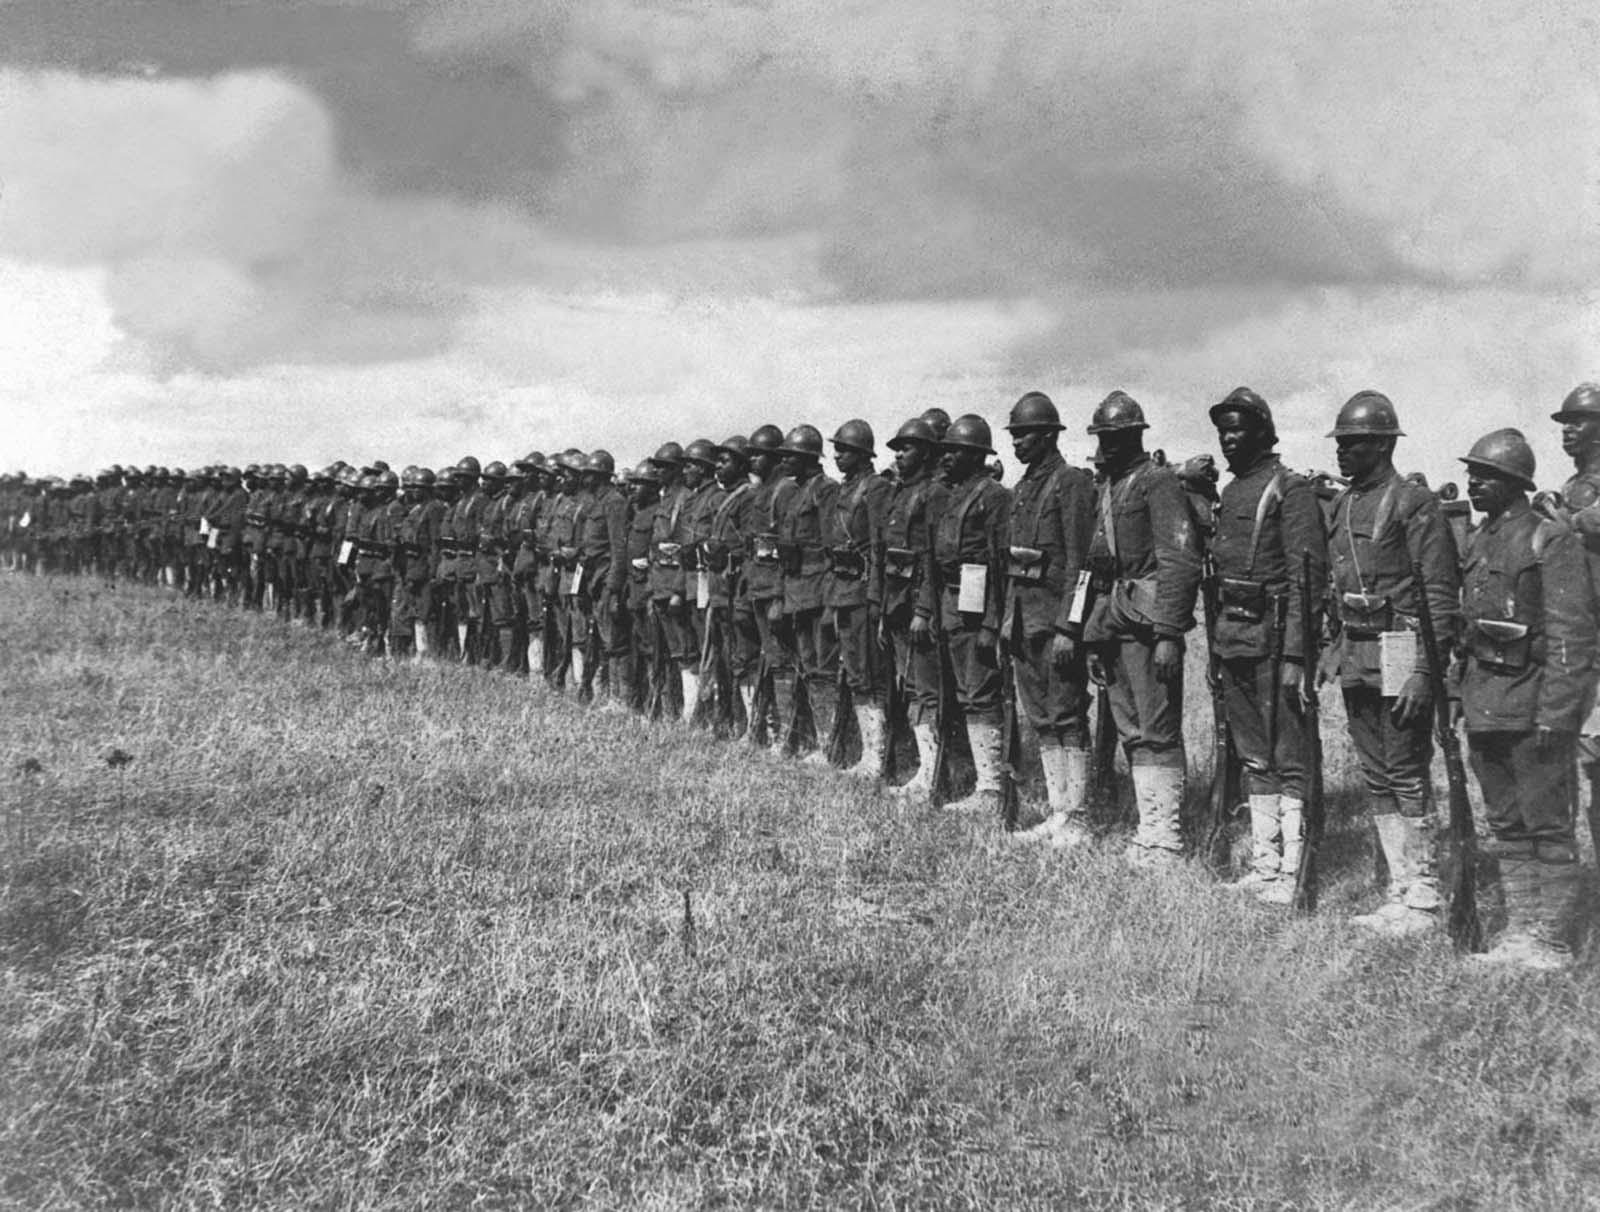 Soldiers of the 369th Infantry Regiment stand at attention.